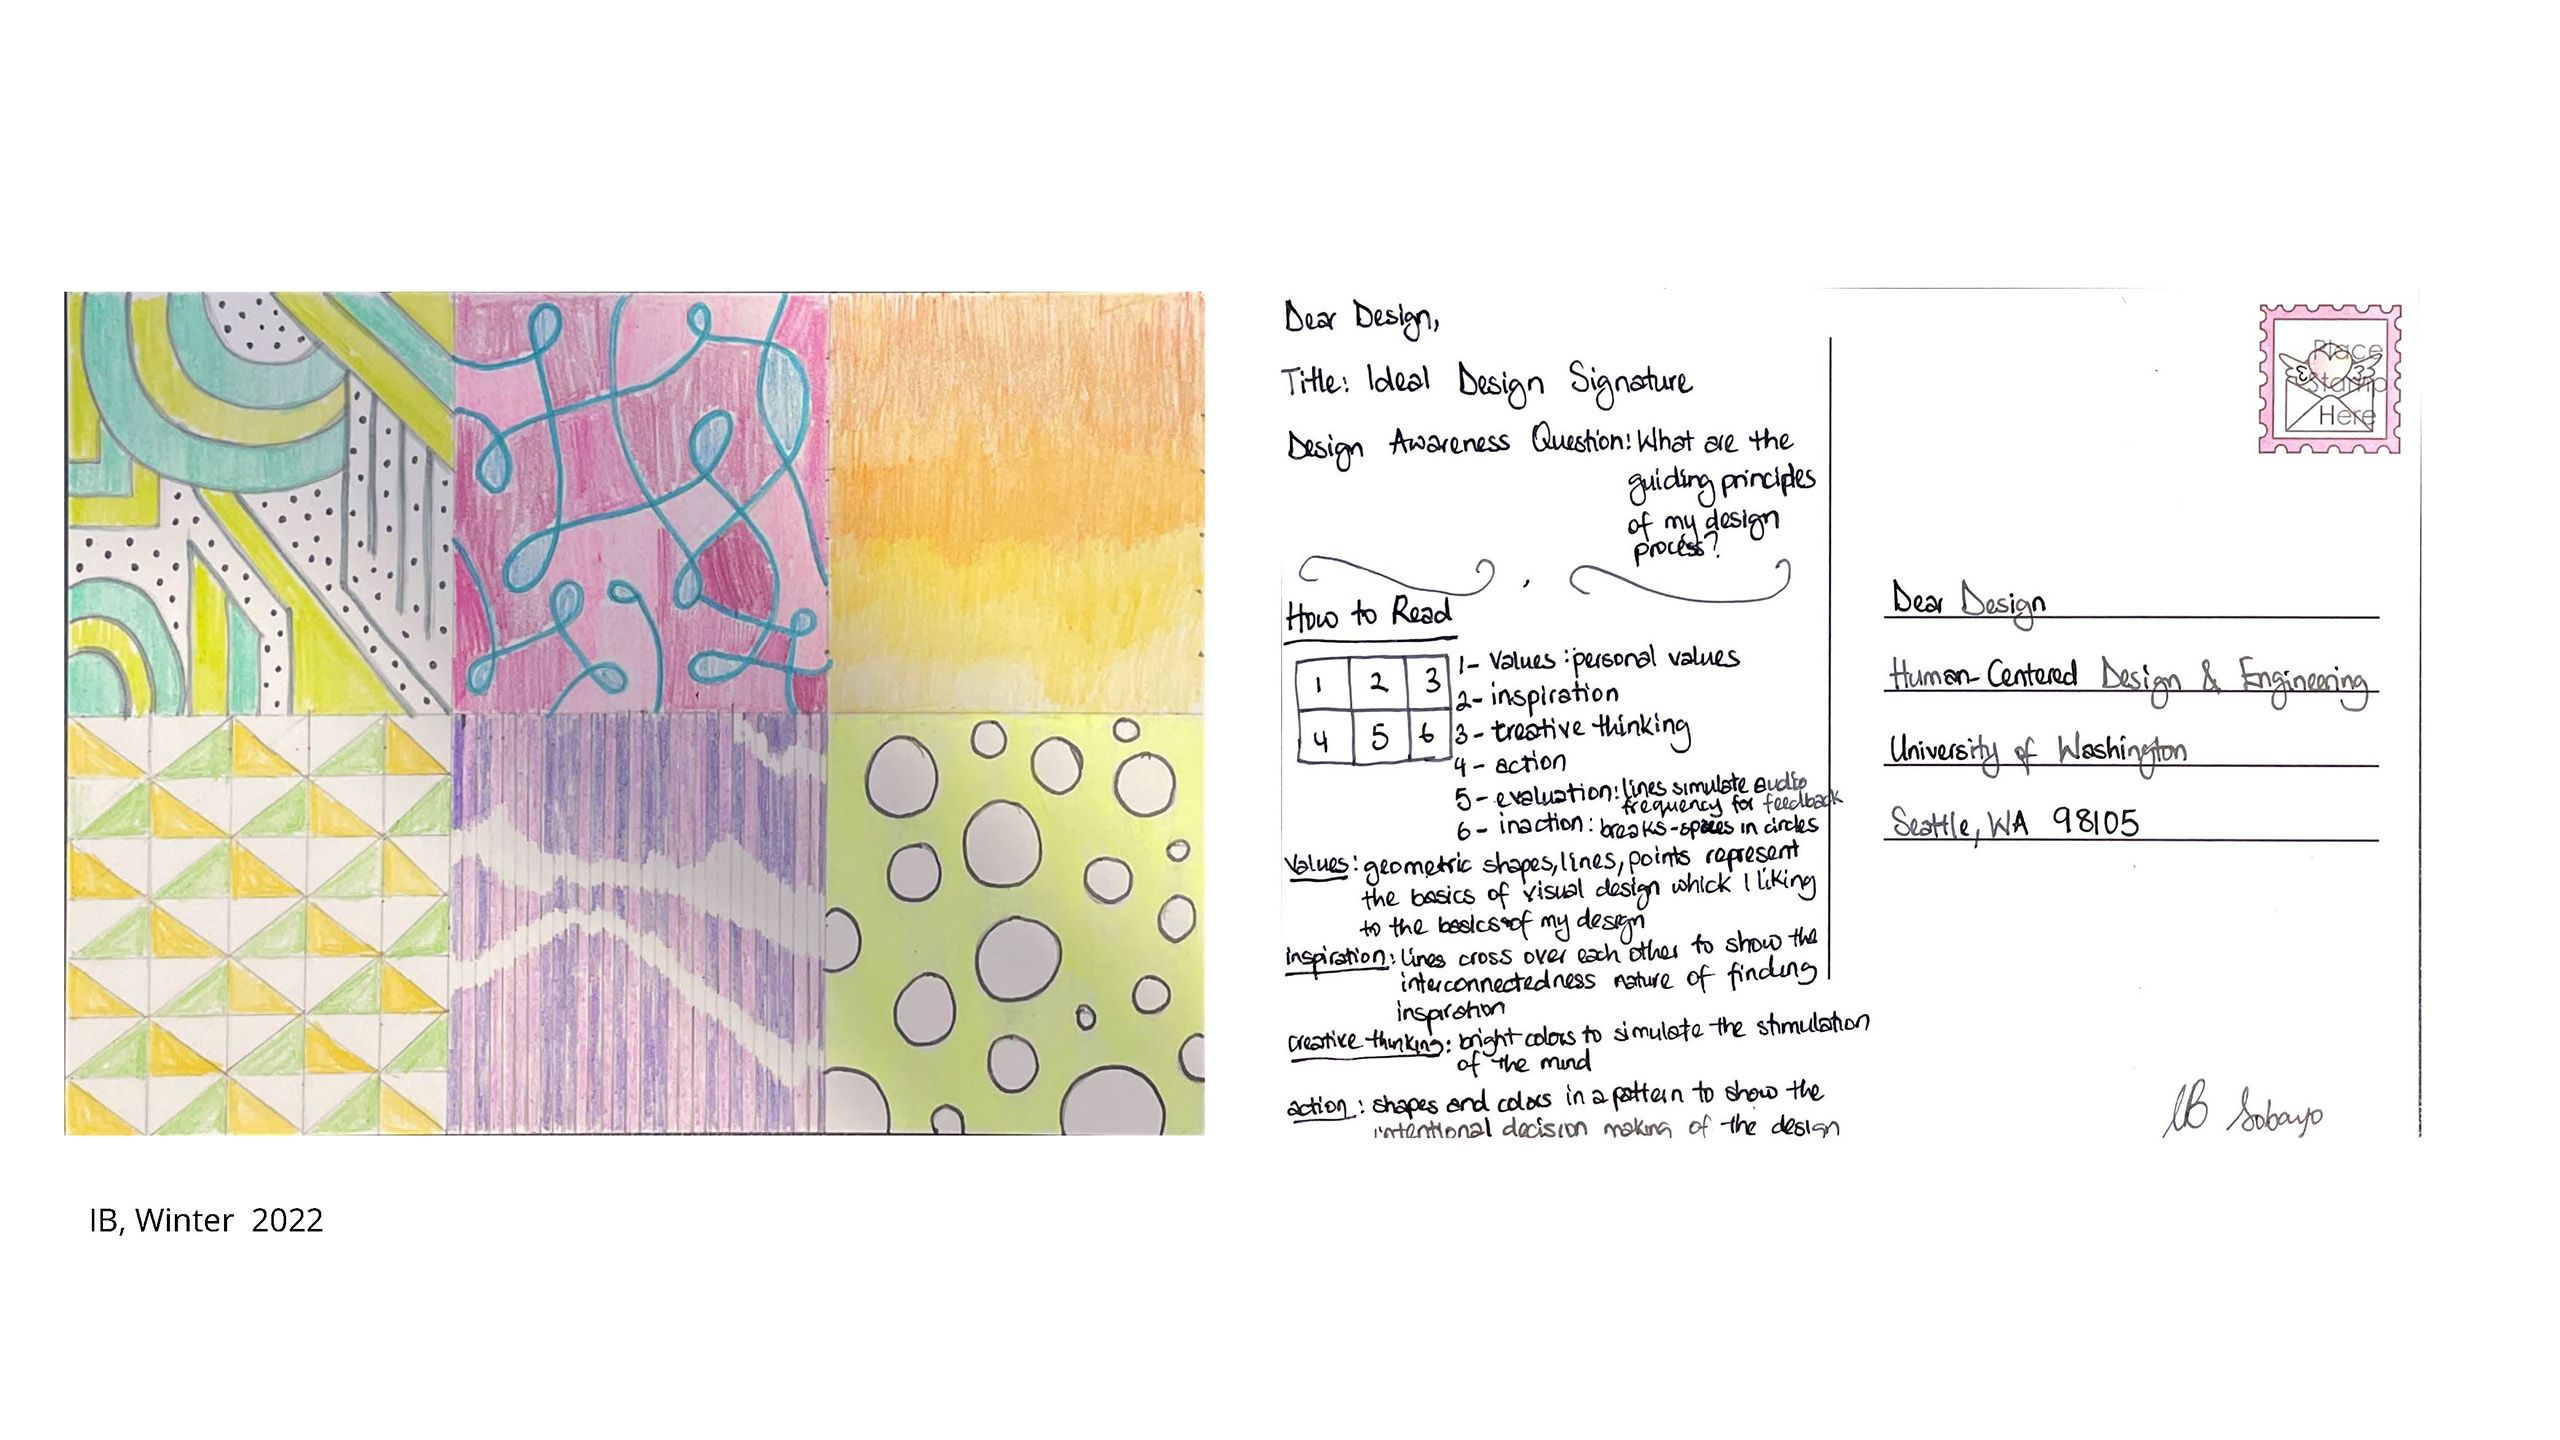 Student postcard illustration of their Ideal Design Process